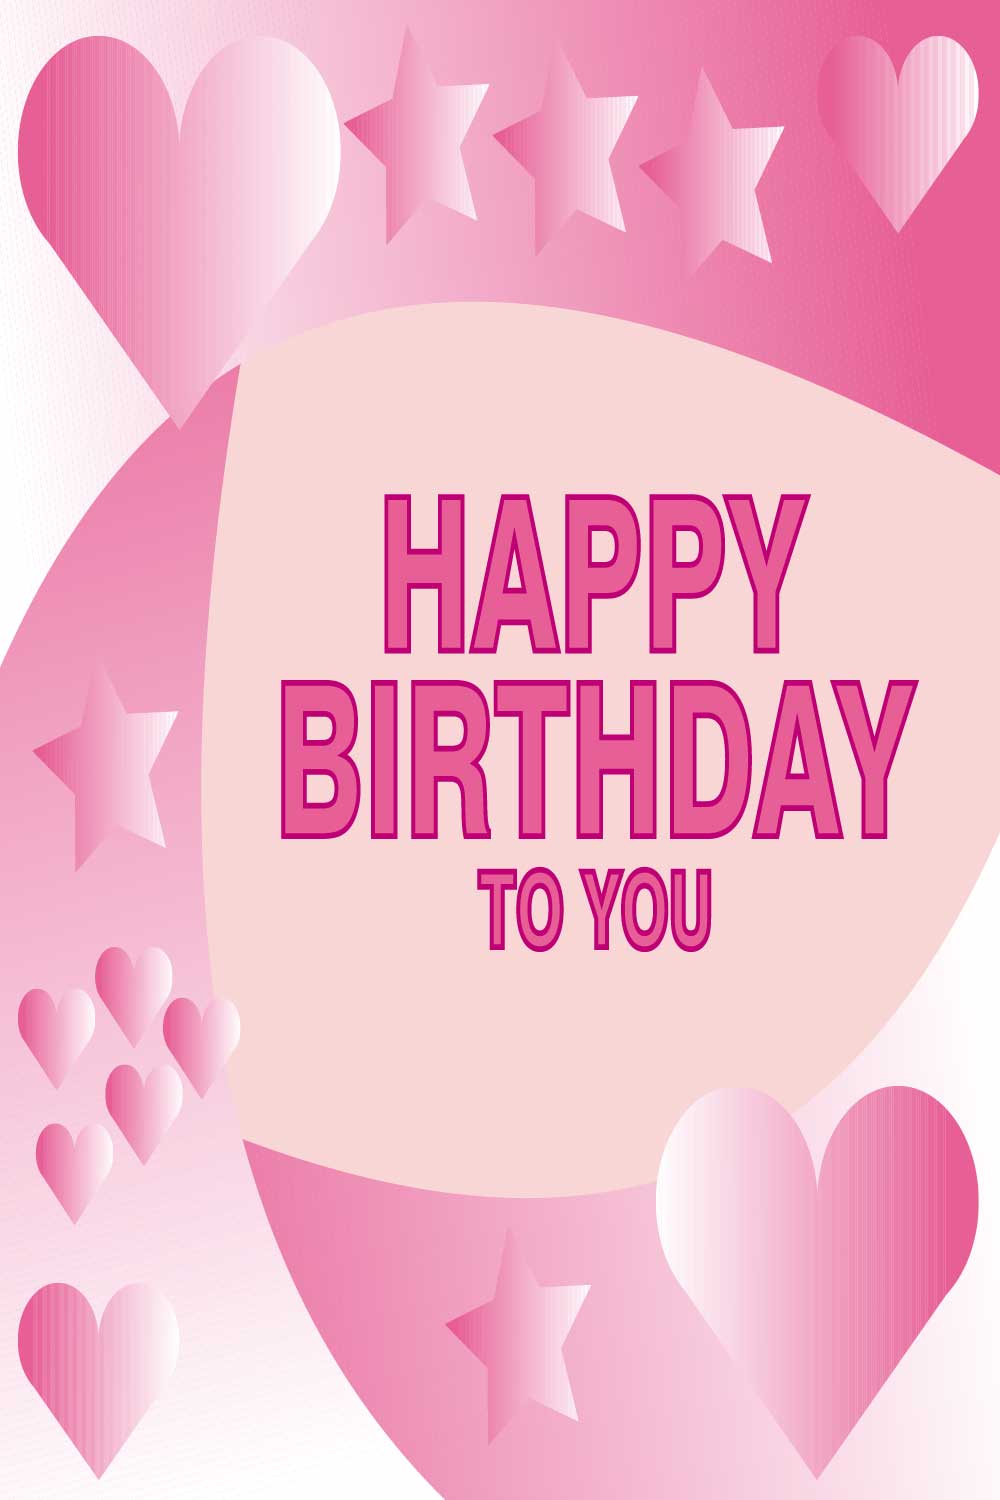 Happy Birthday Card with hearts, stars, and lovely color HD Pictures in JPG, AI and EPS formats pinterest preview image.